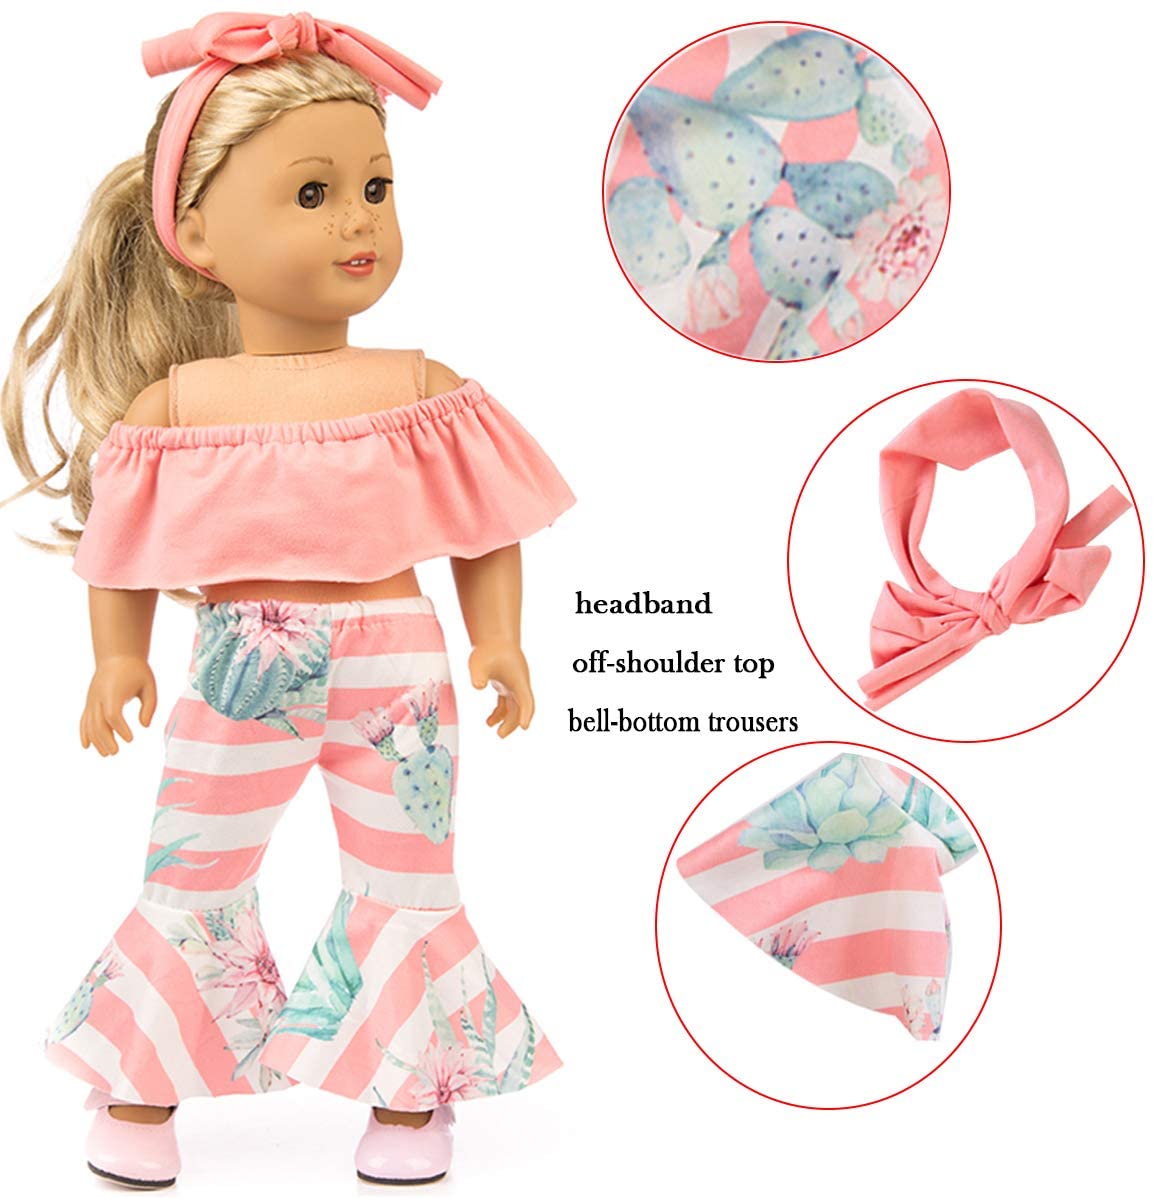 OG dolls/43cm New Born Baby Dolls/15 inch Bitty Baby Doll ebuddy 4 Sets Doll Clothes Include Top Skirt Jeans Pants Headband for 18 inch American Girl Dolls 